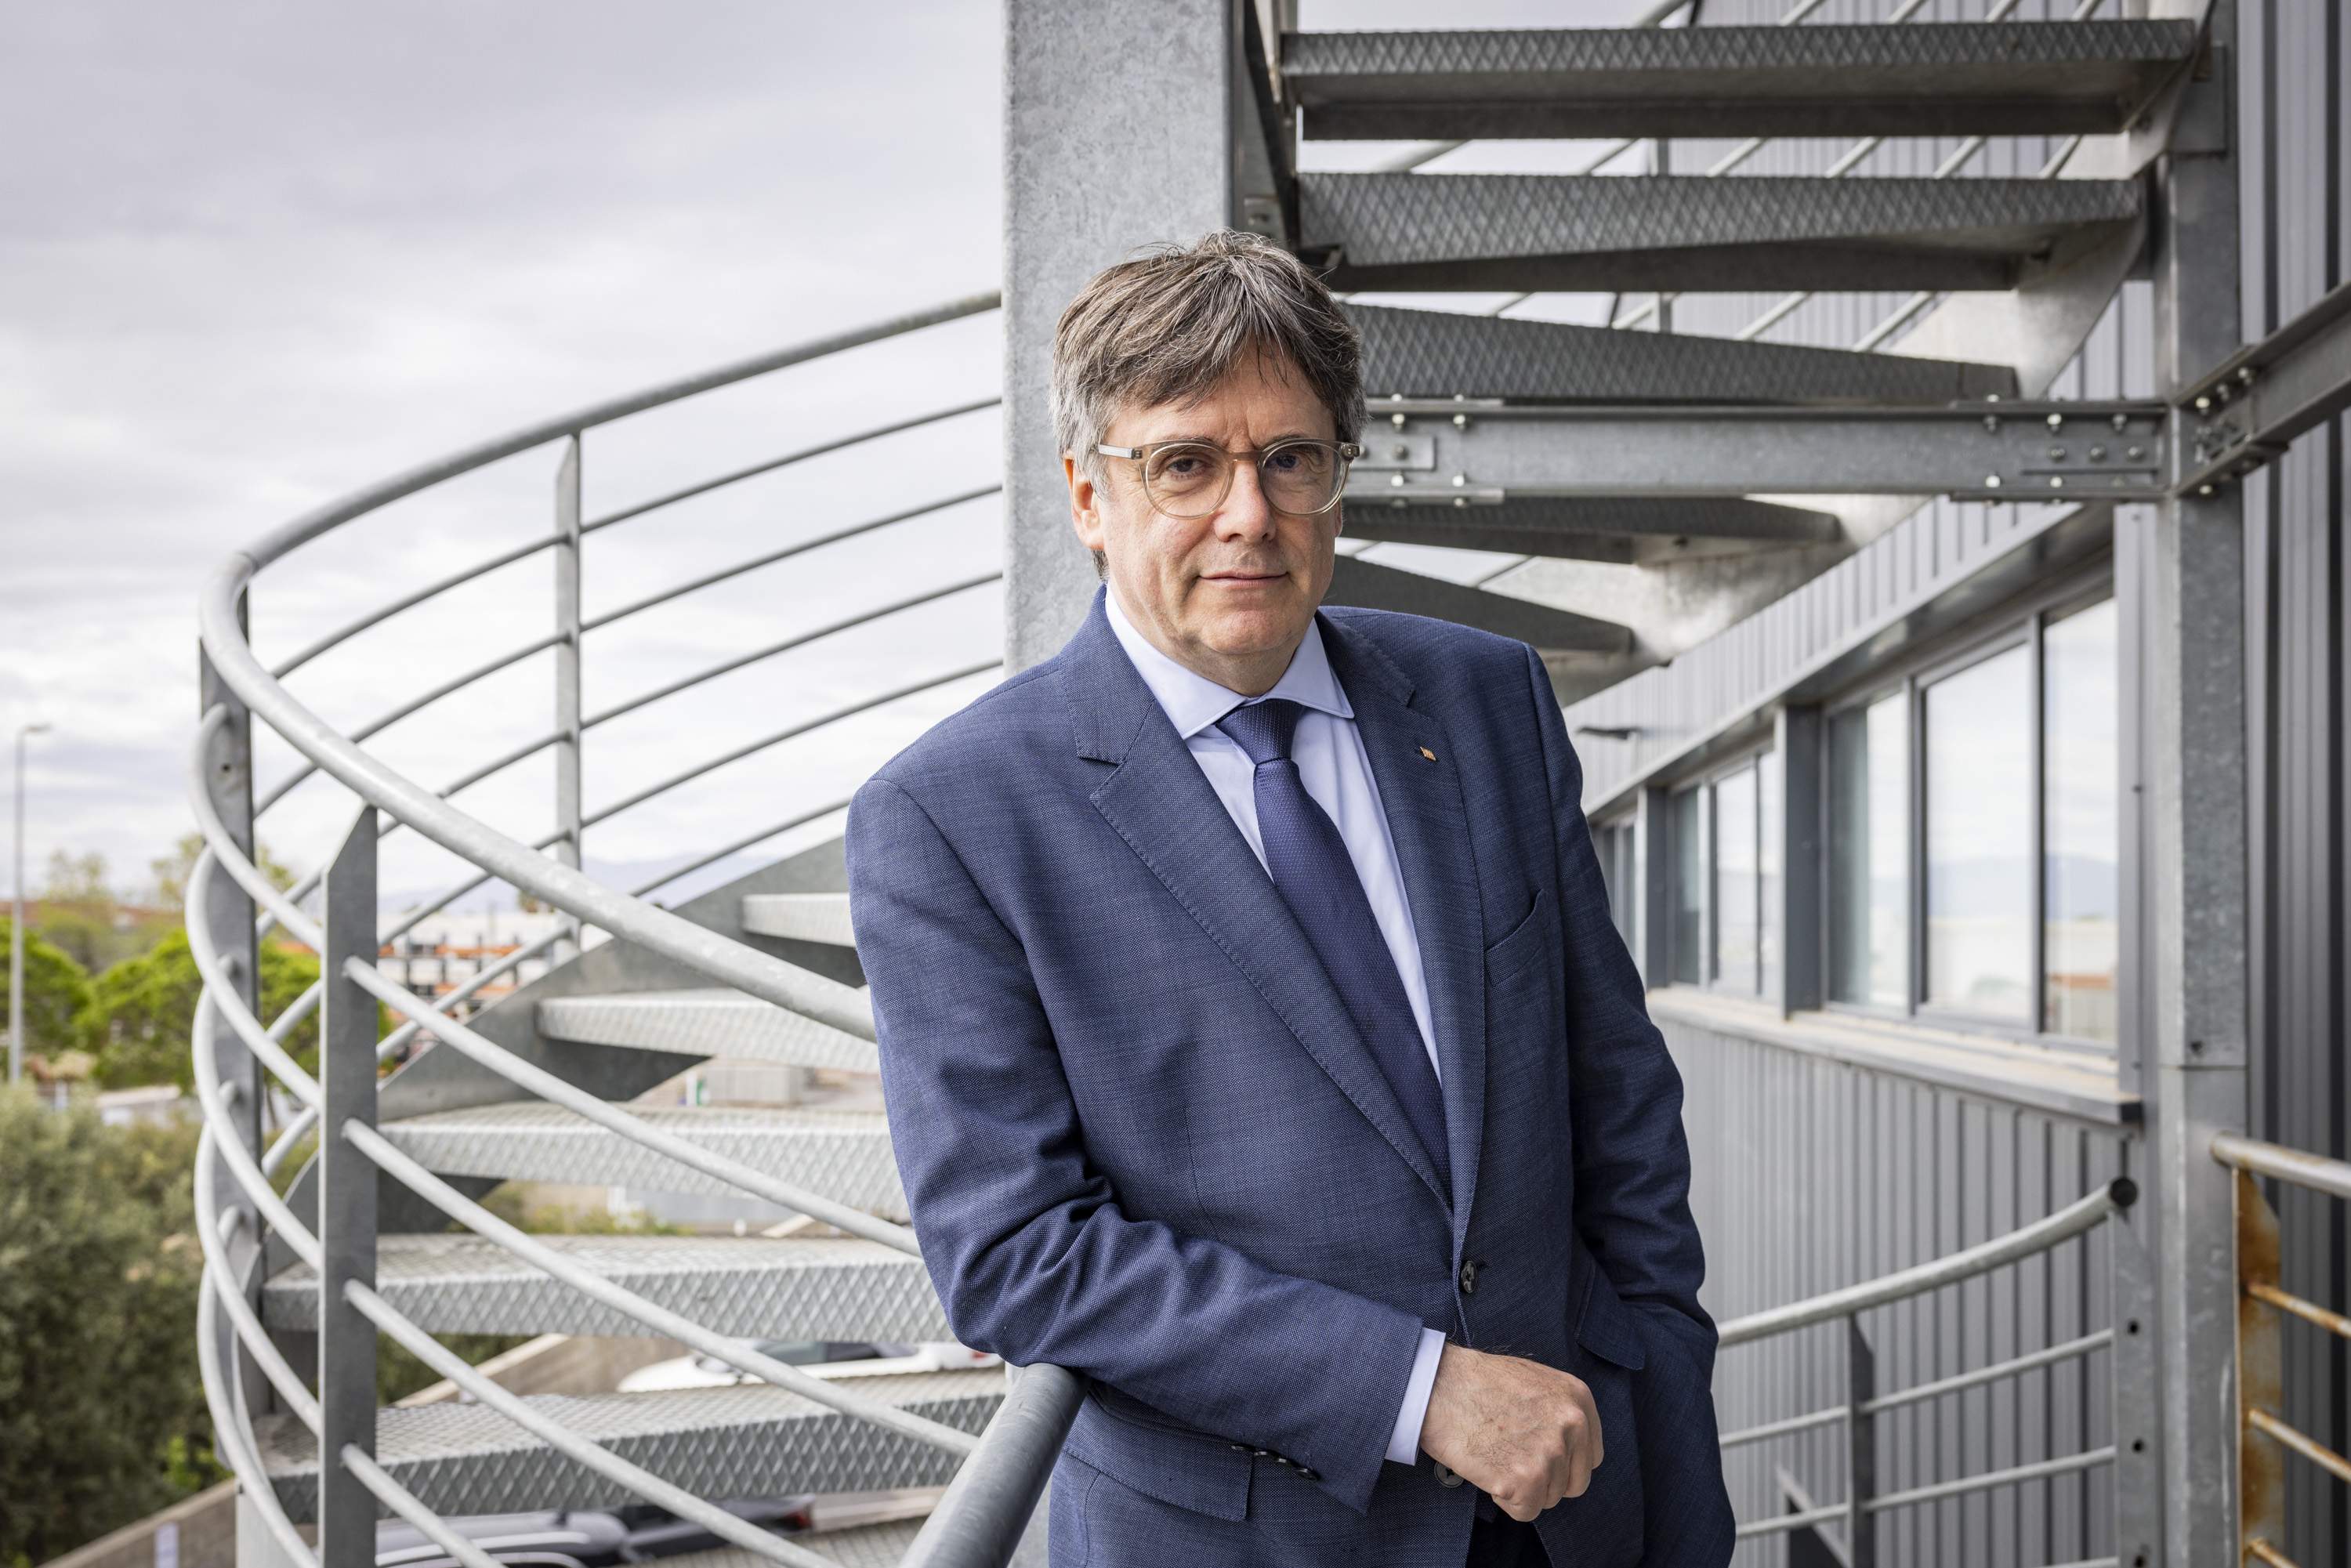 Carles Puigdemont: "If Illa does a Collboni, you know what the consequences are for Pedro Sánchez"